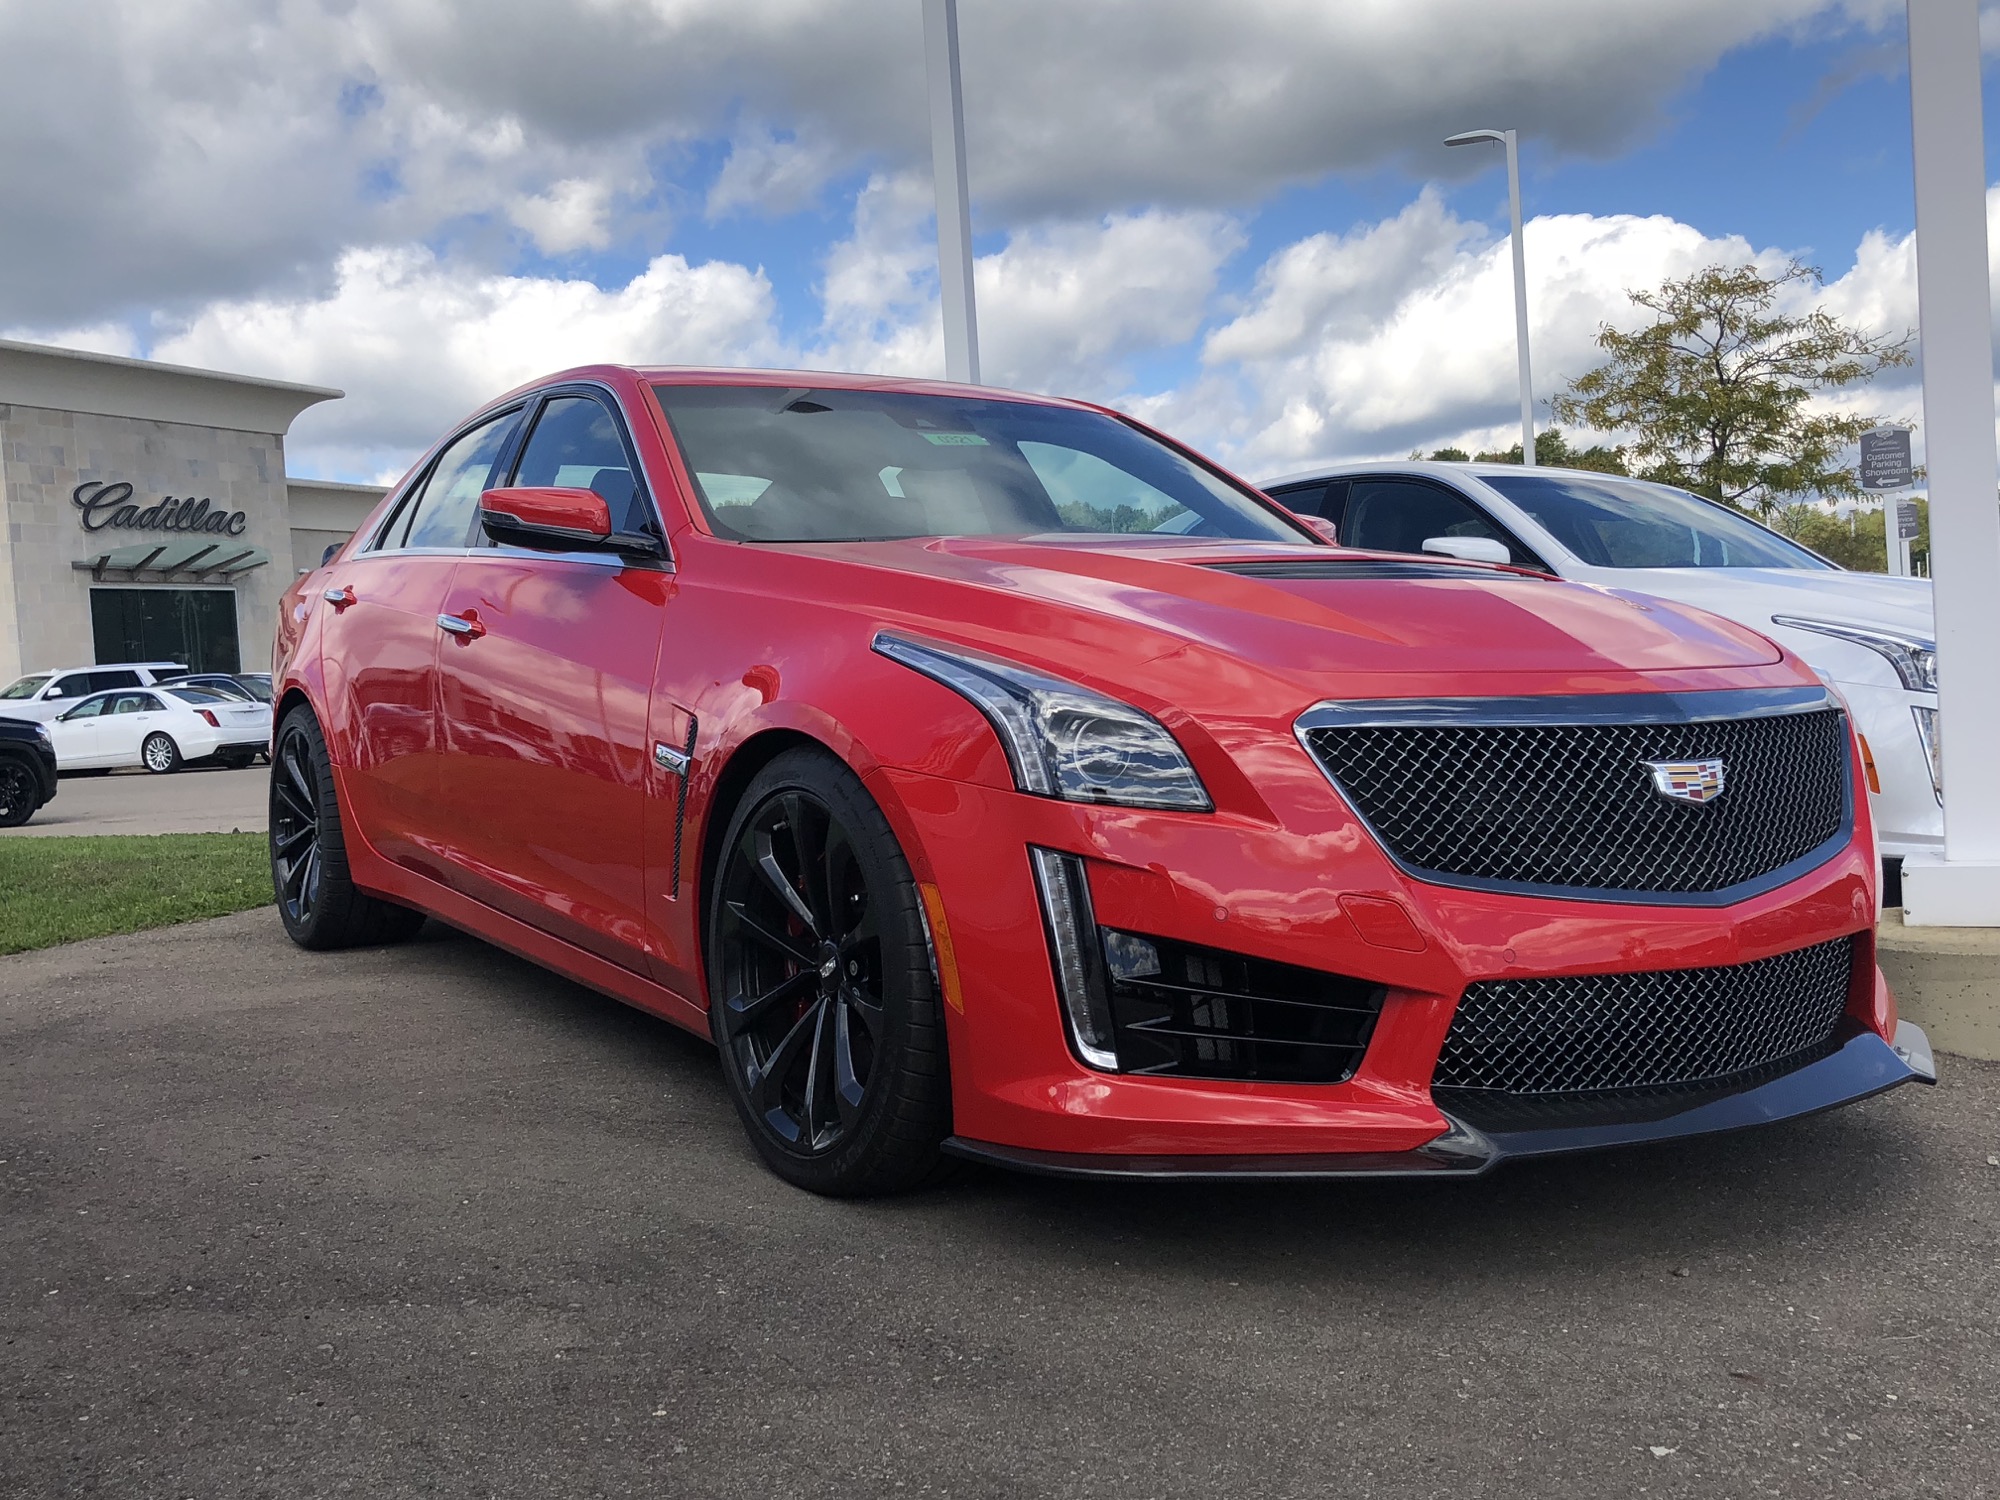 Details Emerge On Last Cadillac Cts V Ever Produced Gm